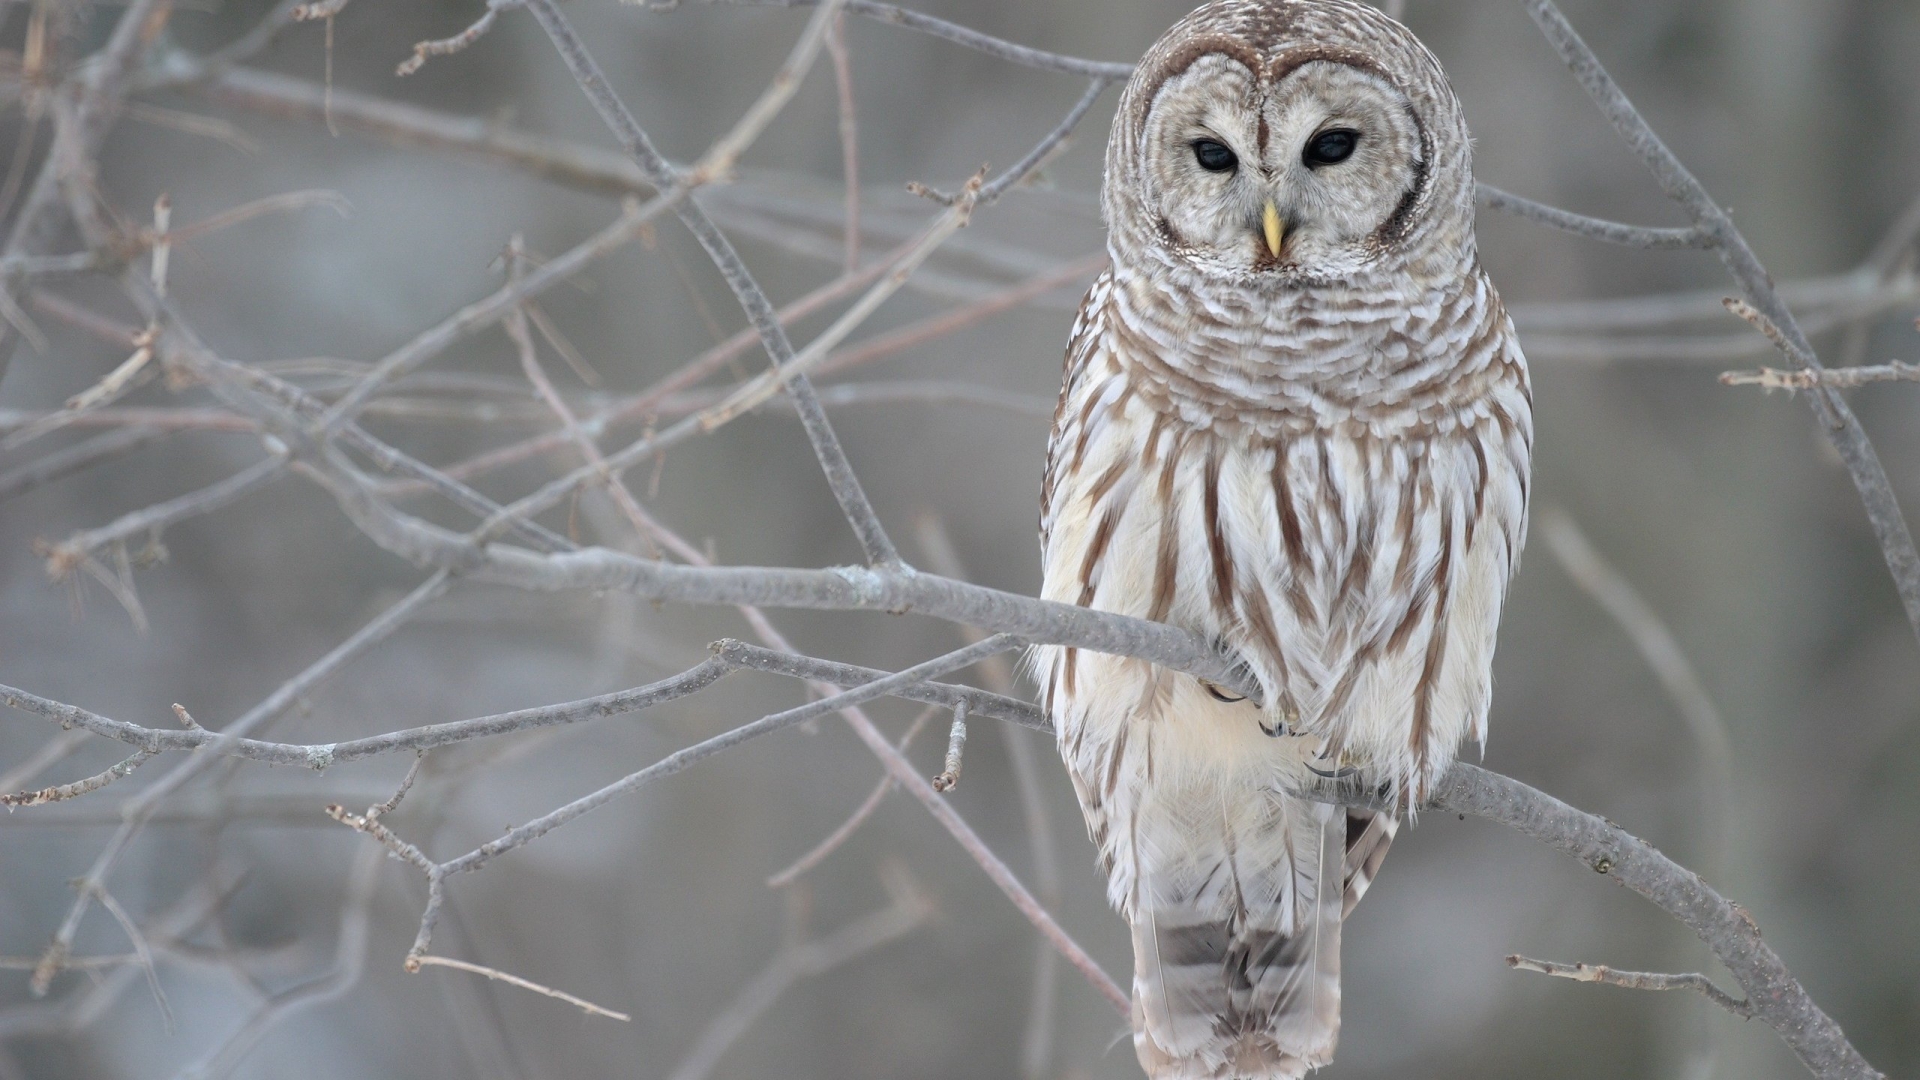 Young Owl for 1920 x 1080 HDTV 1080p resolution